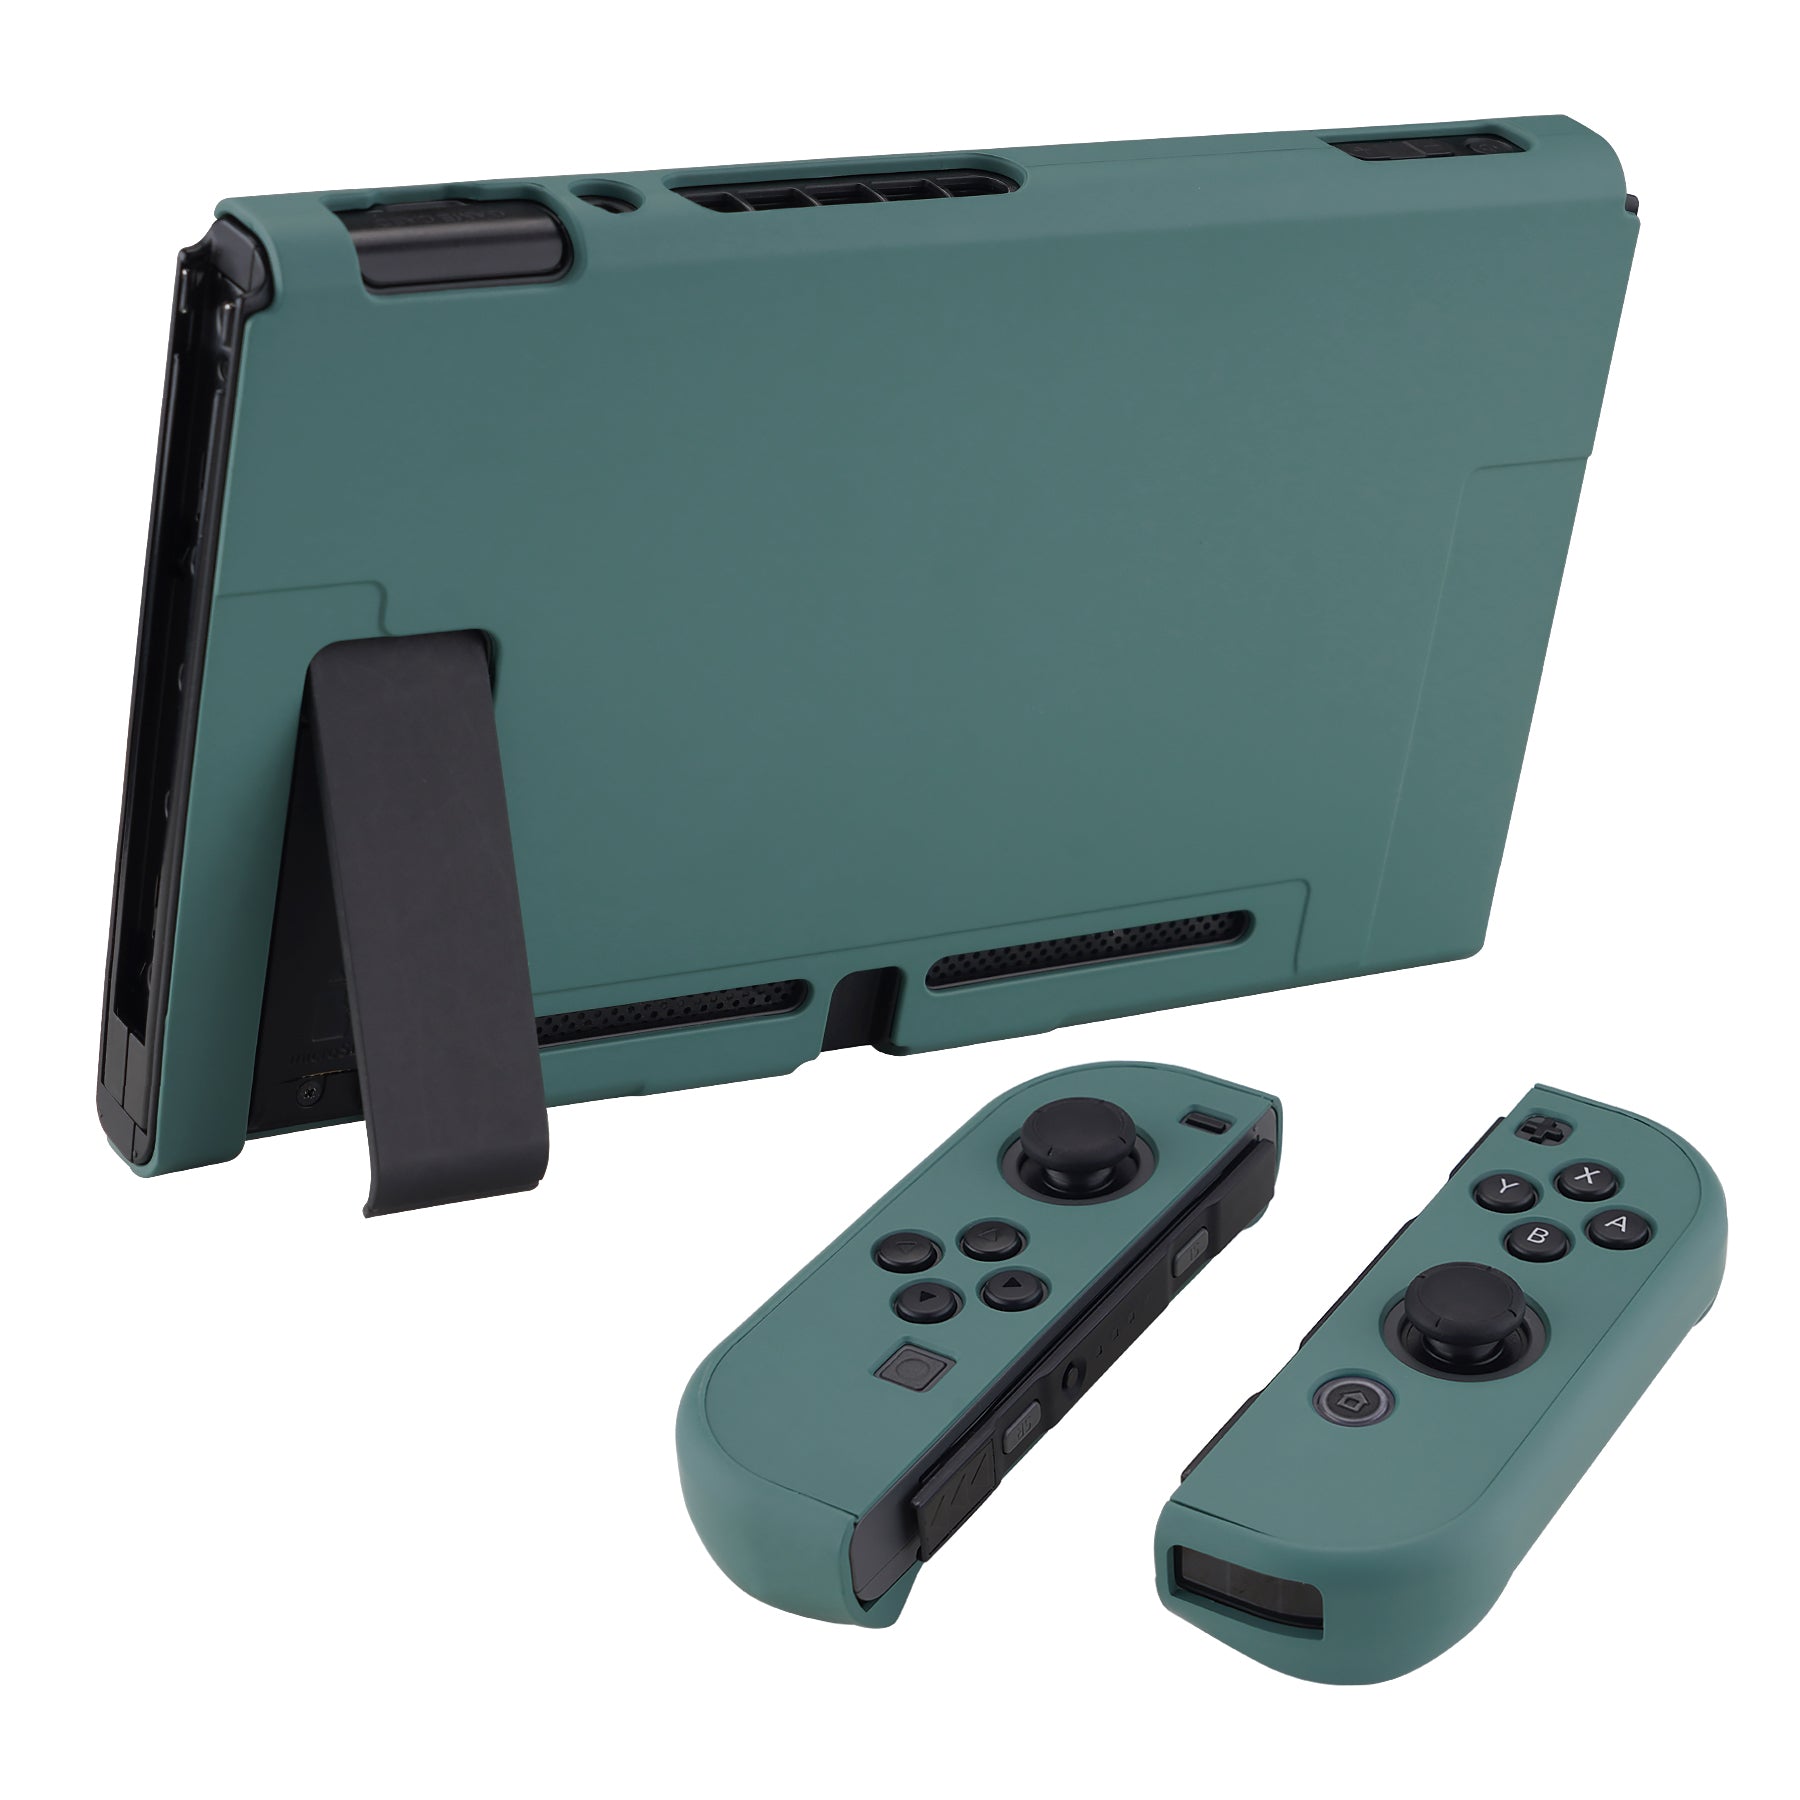 For Nintendo Switch OLED Protective Case Hard Cover Console Joy-Con Shell  NS